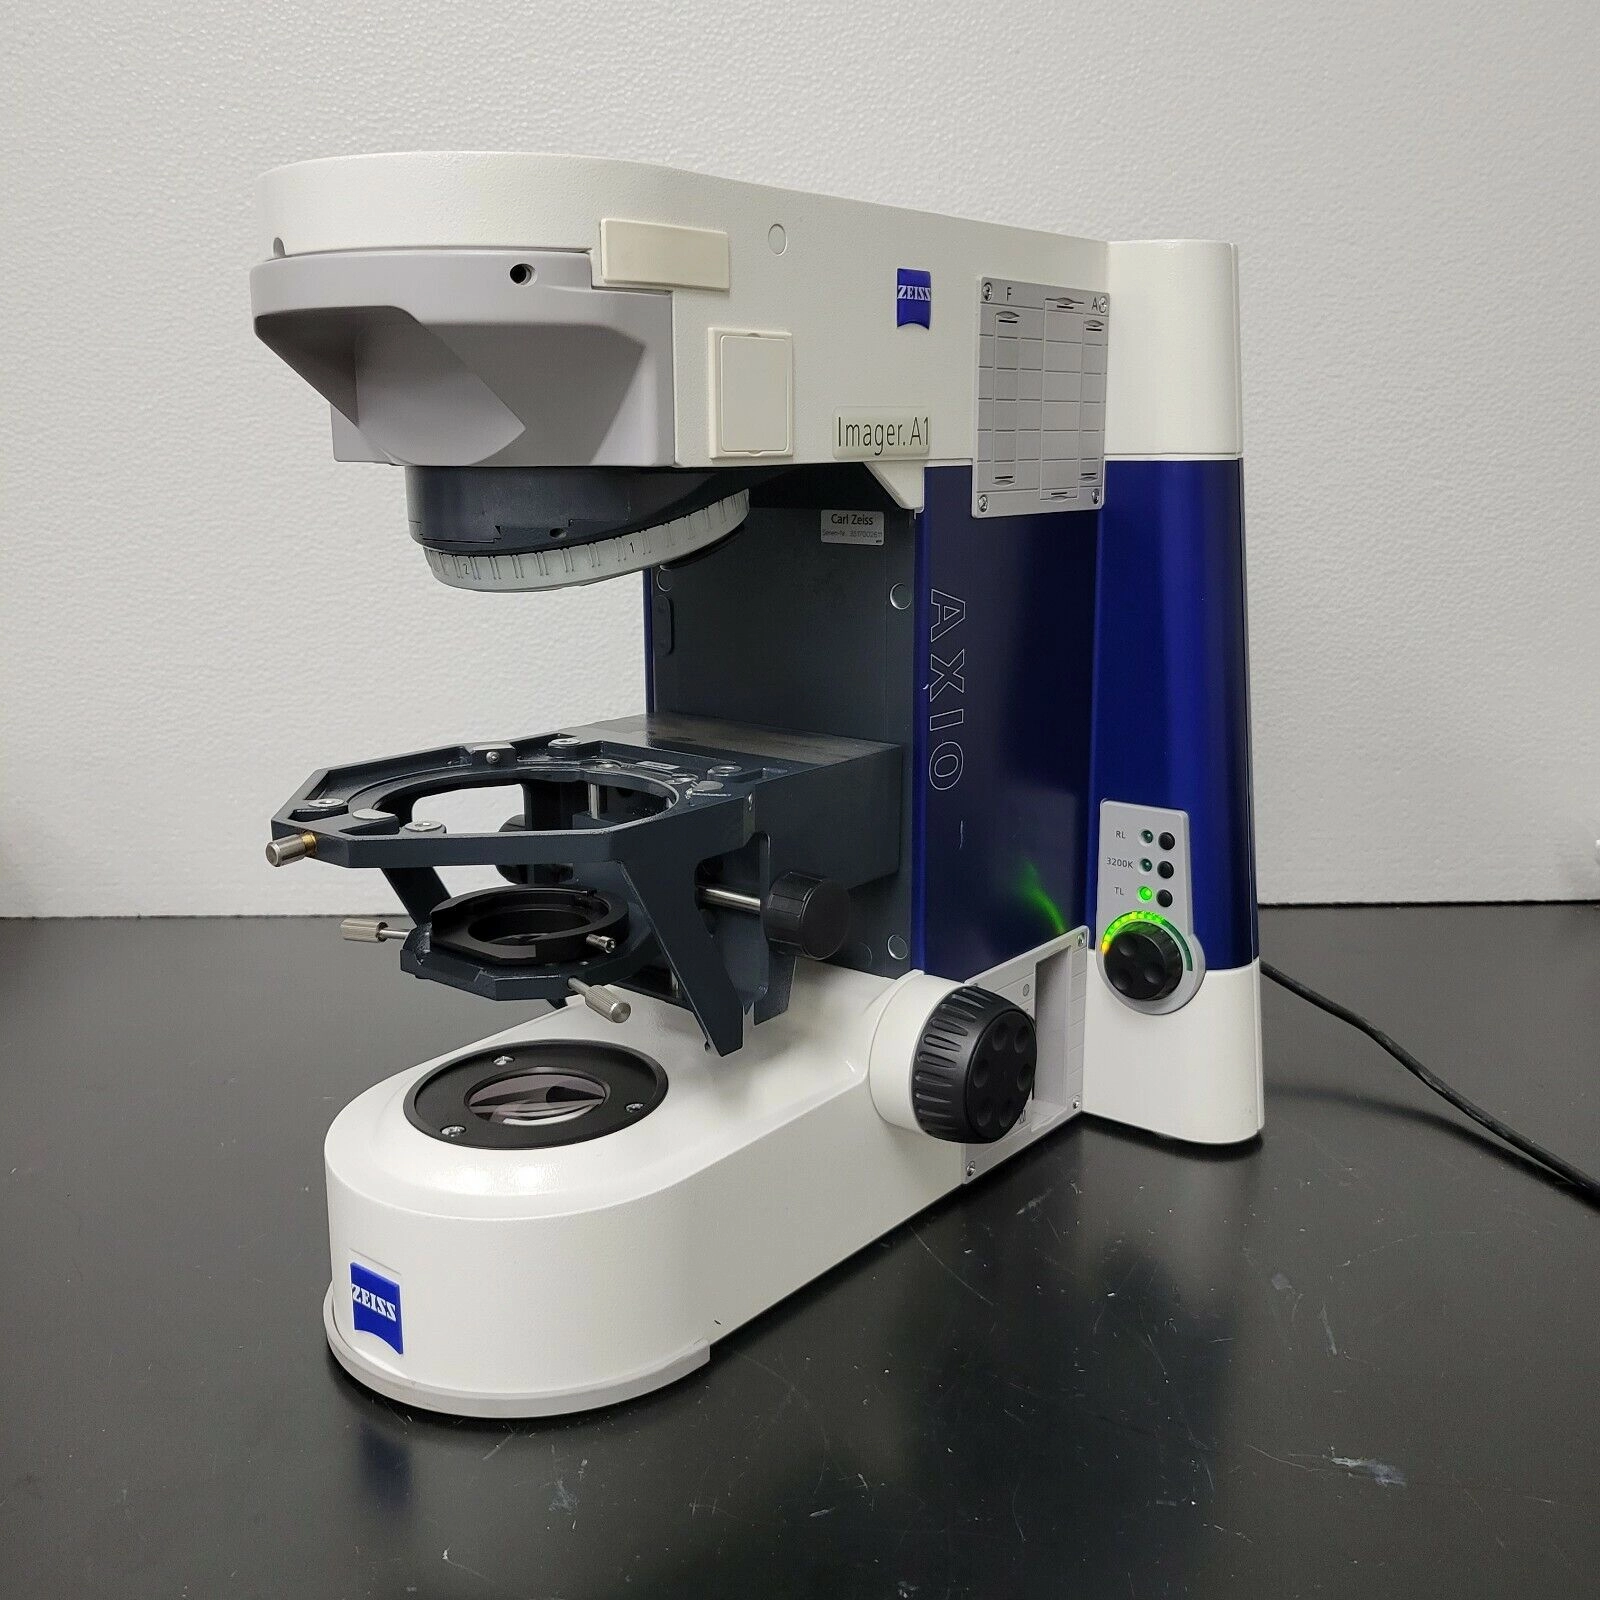 Zeiss Microscope AXIO Imager.A1 Stand for Parts Electronics Nosepiece Focus